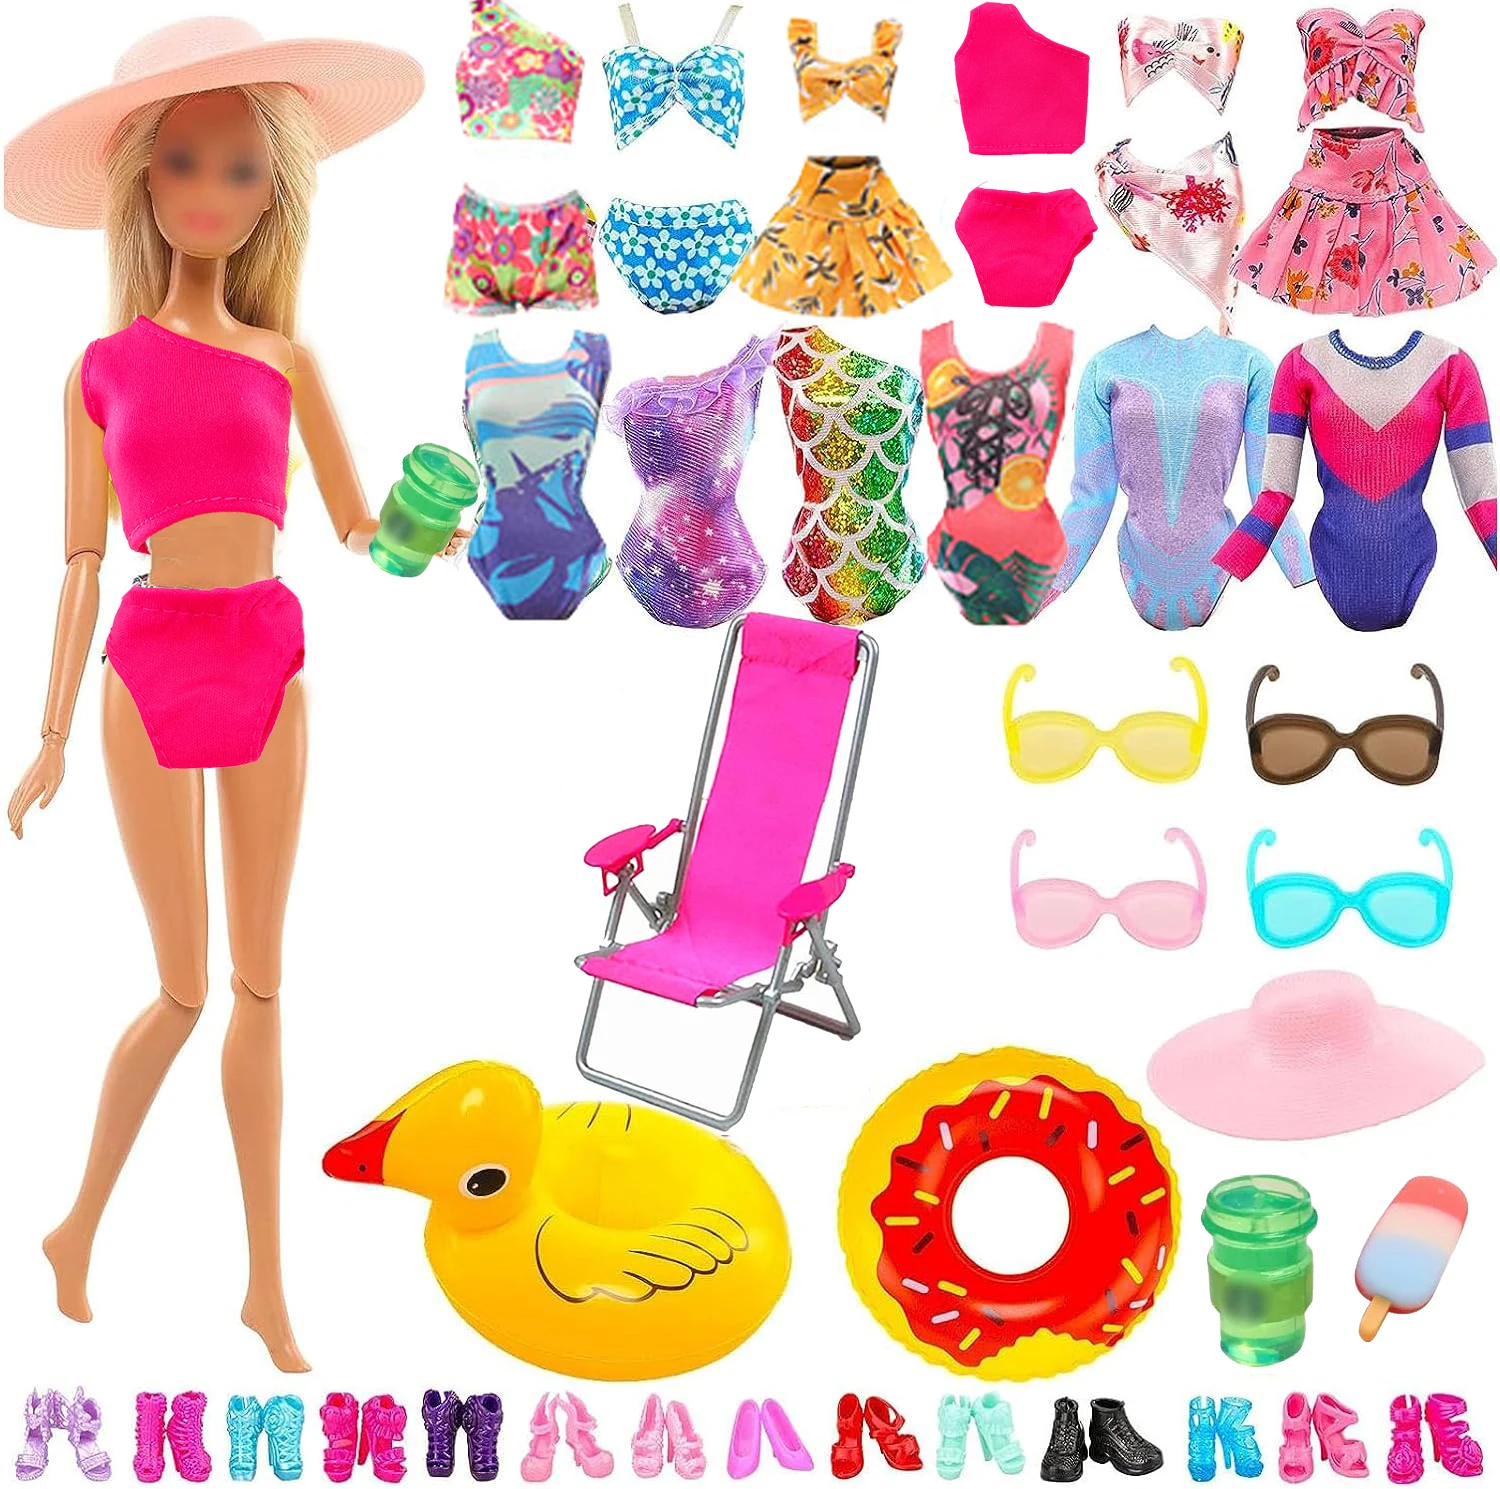 

24 Pcs Doll Clothes & Accessories Summer Beach Set 5 Swimsuits with 19 Accessories Shoes Glasses Drinks Swimming Rings for 11.5